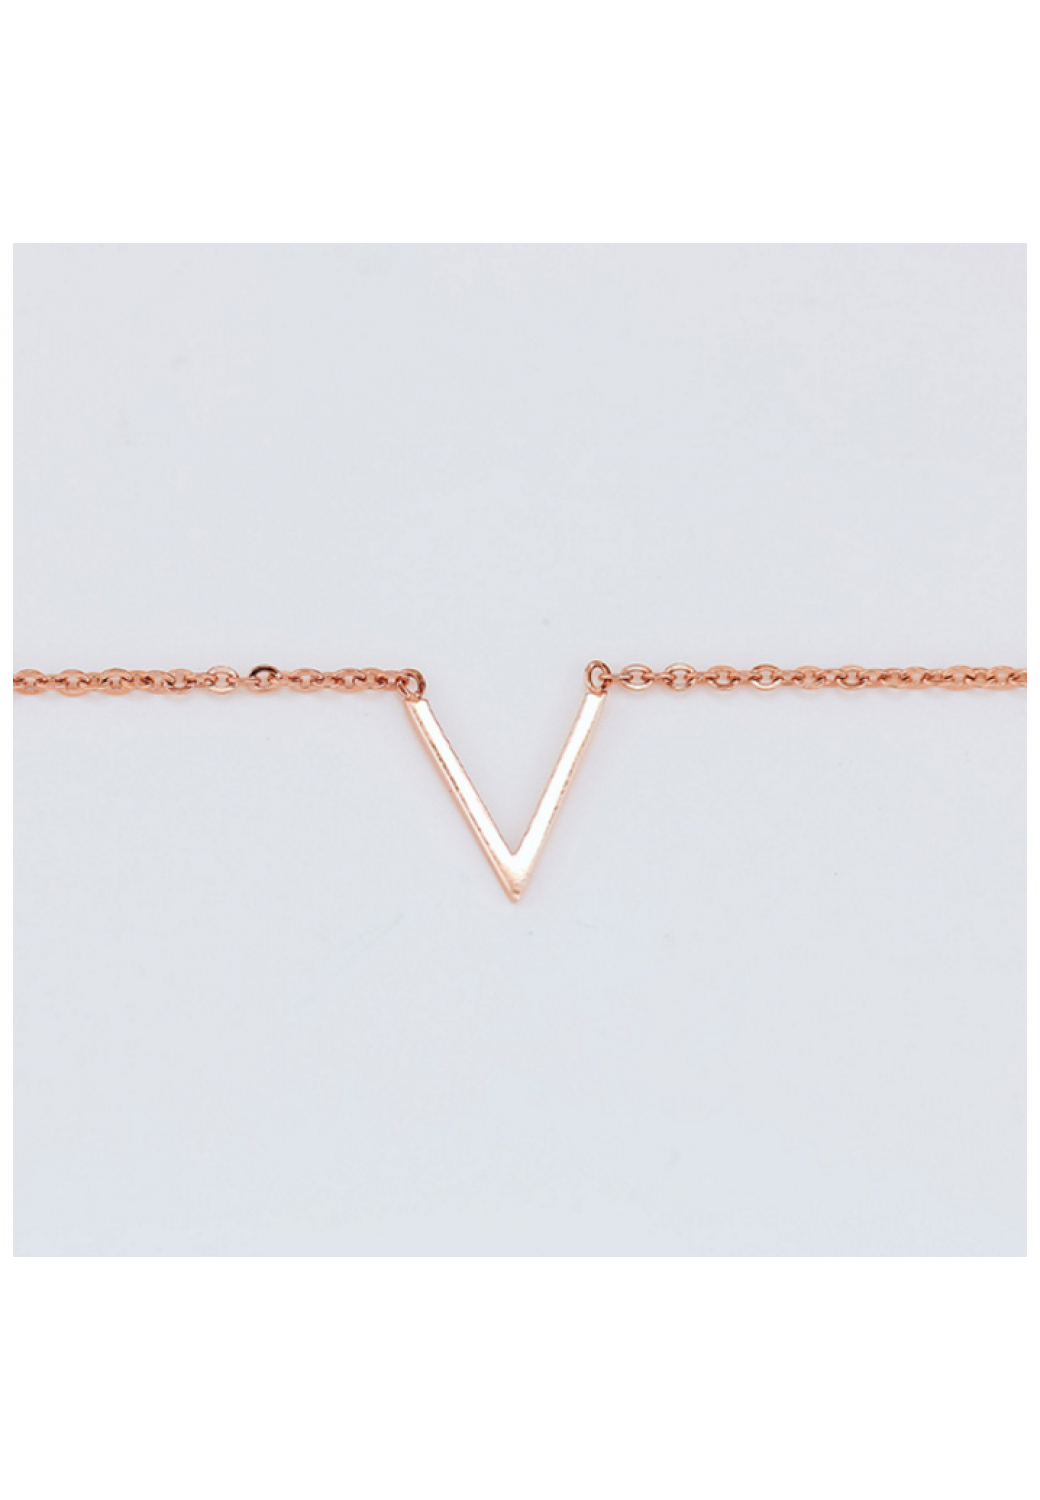 NECKLACE-16-ROSE GOLD